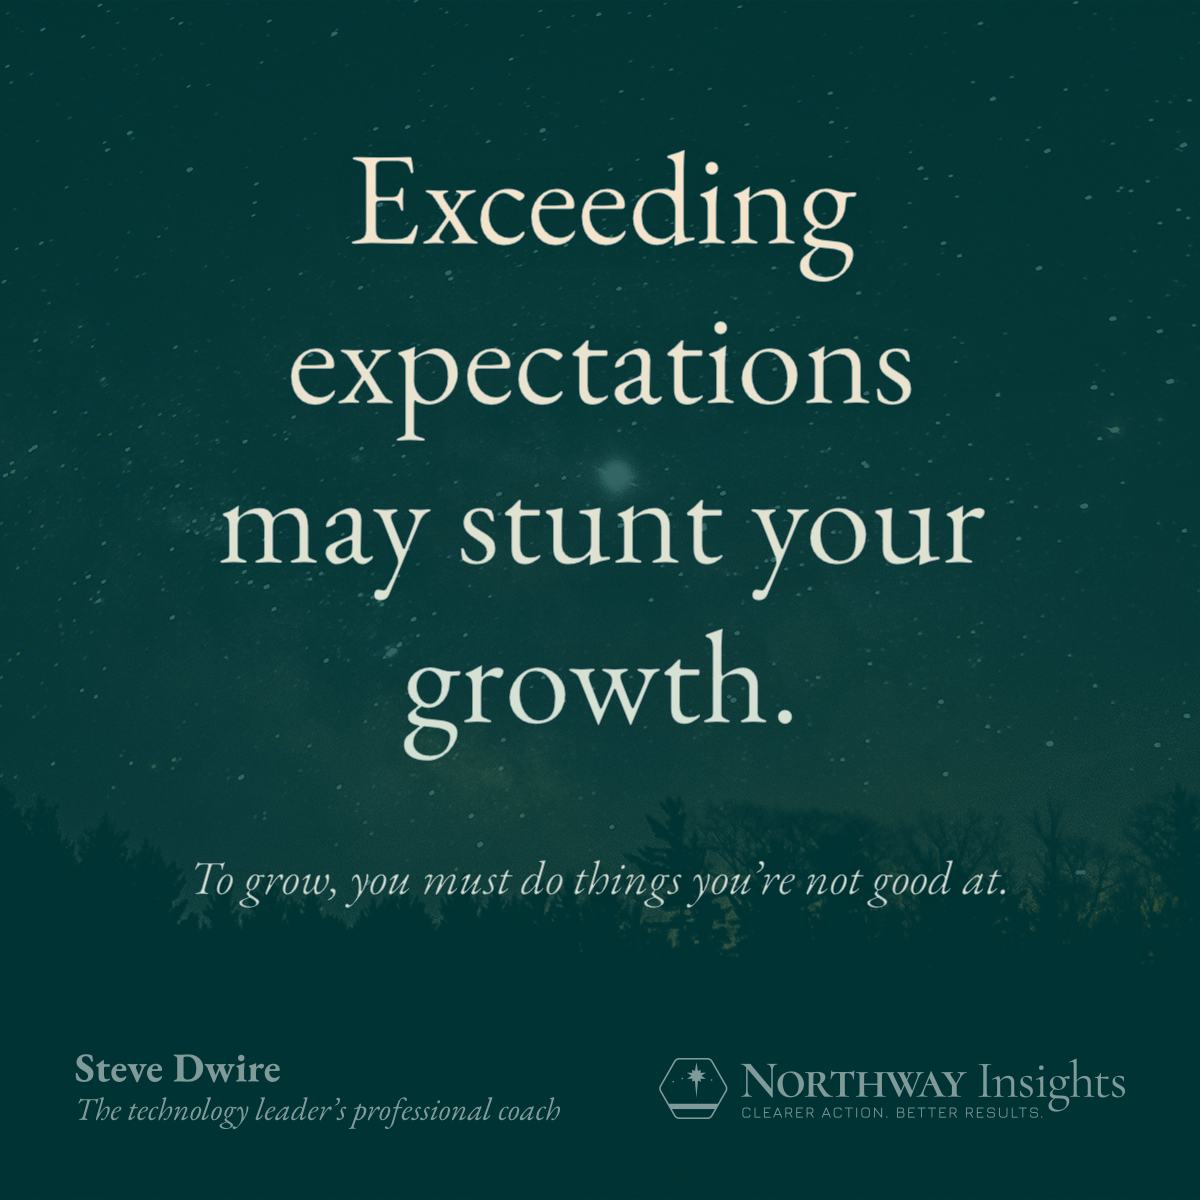 Exceeding expectations may stunt your growth. To grow, you must do things you're not good at.